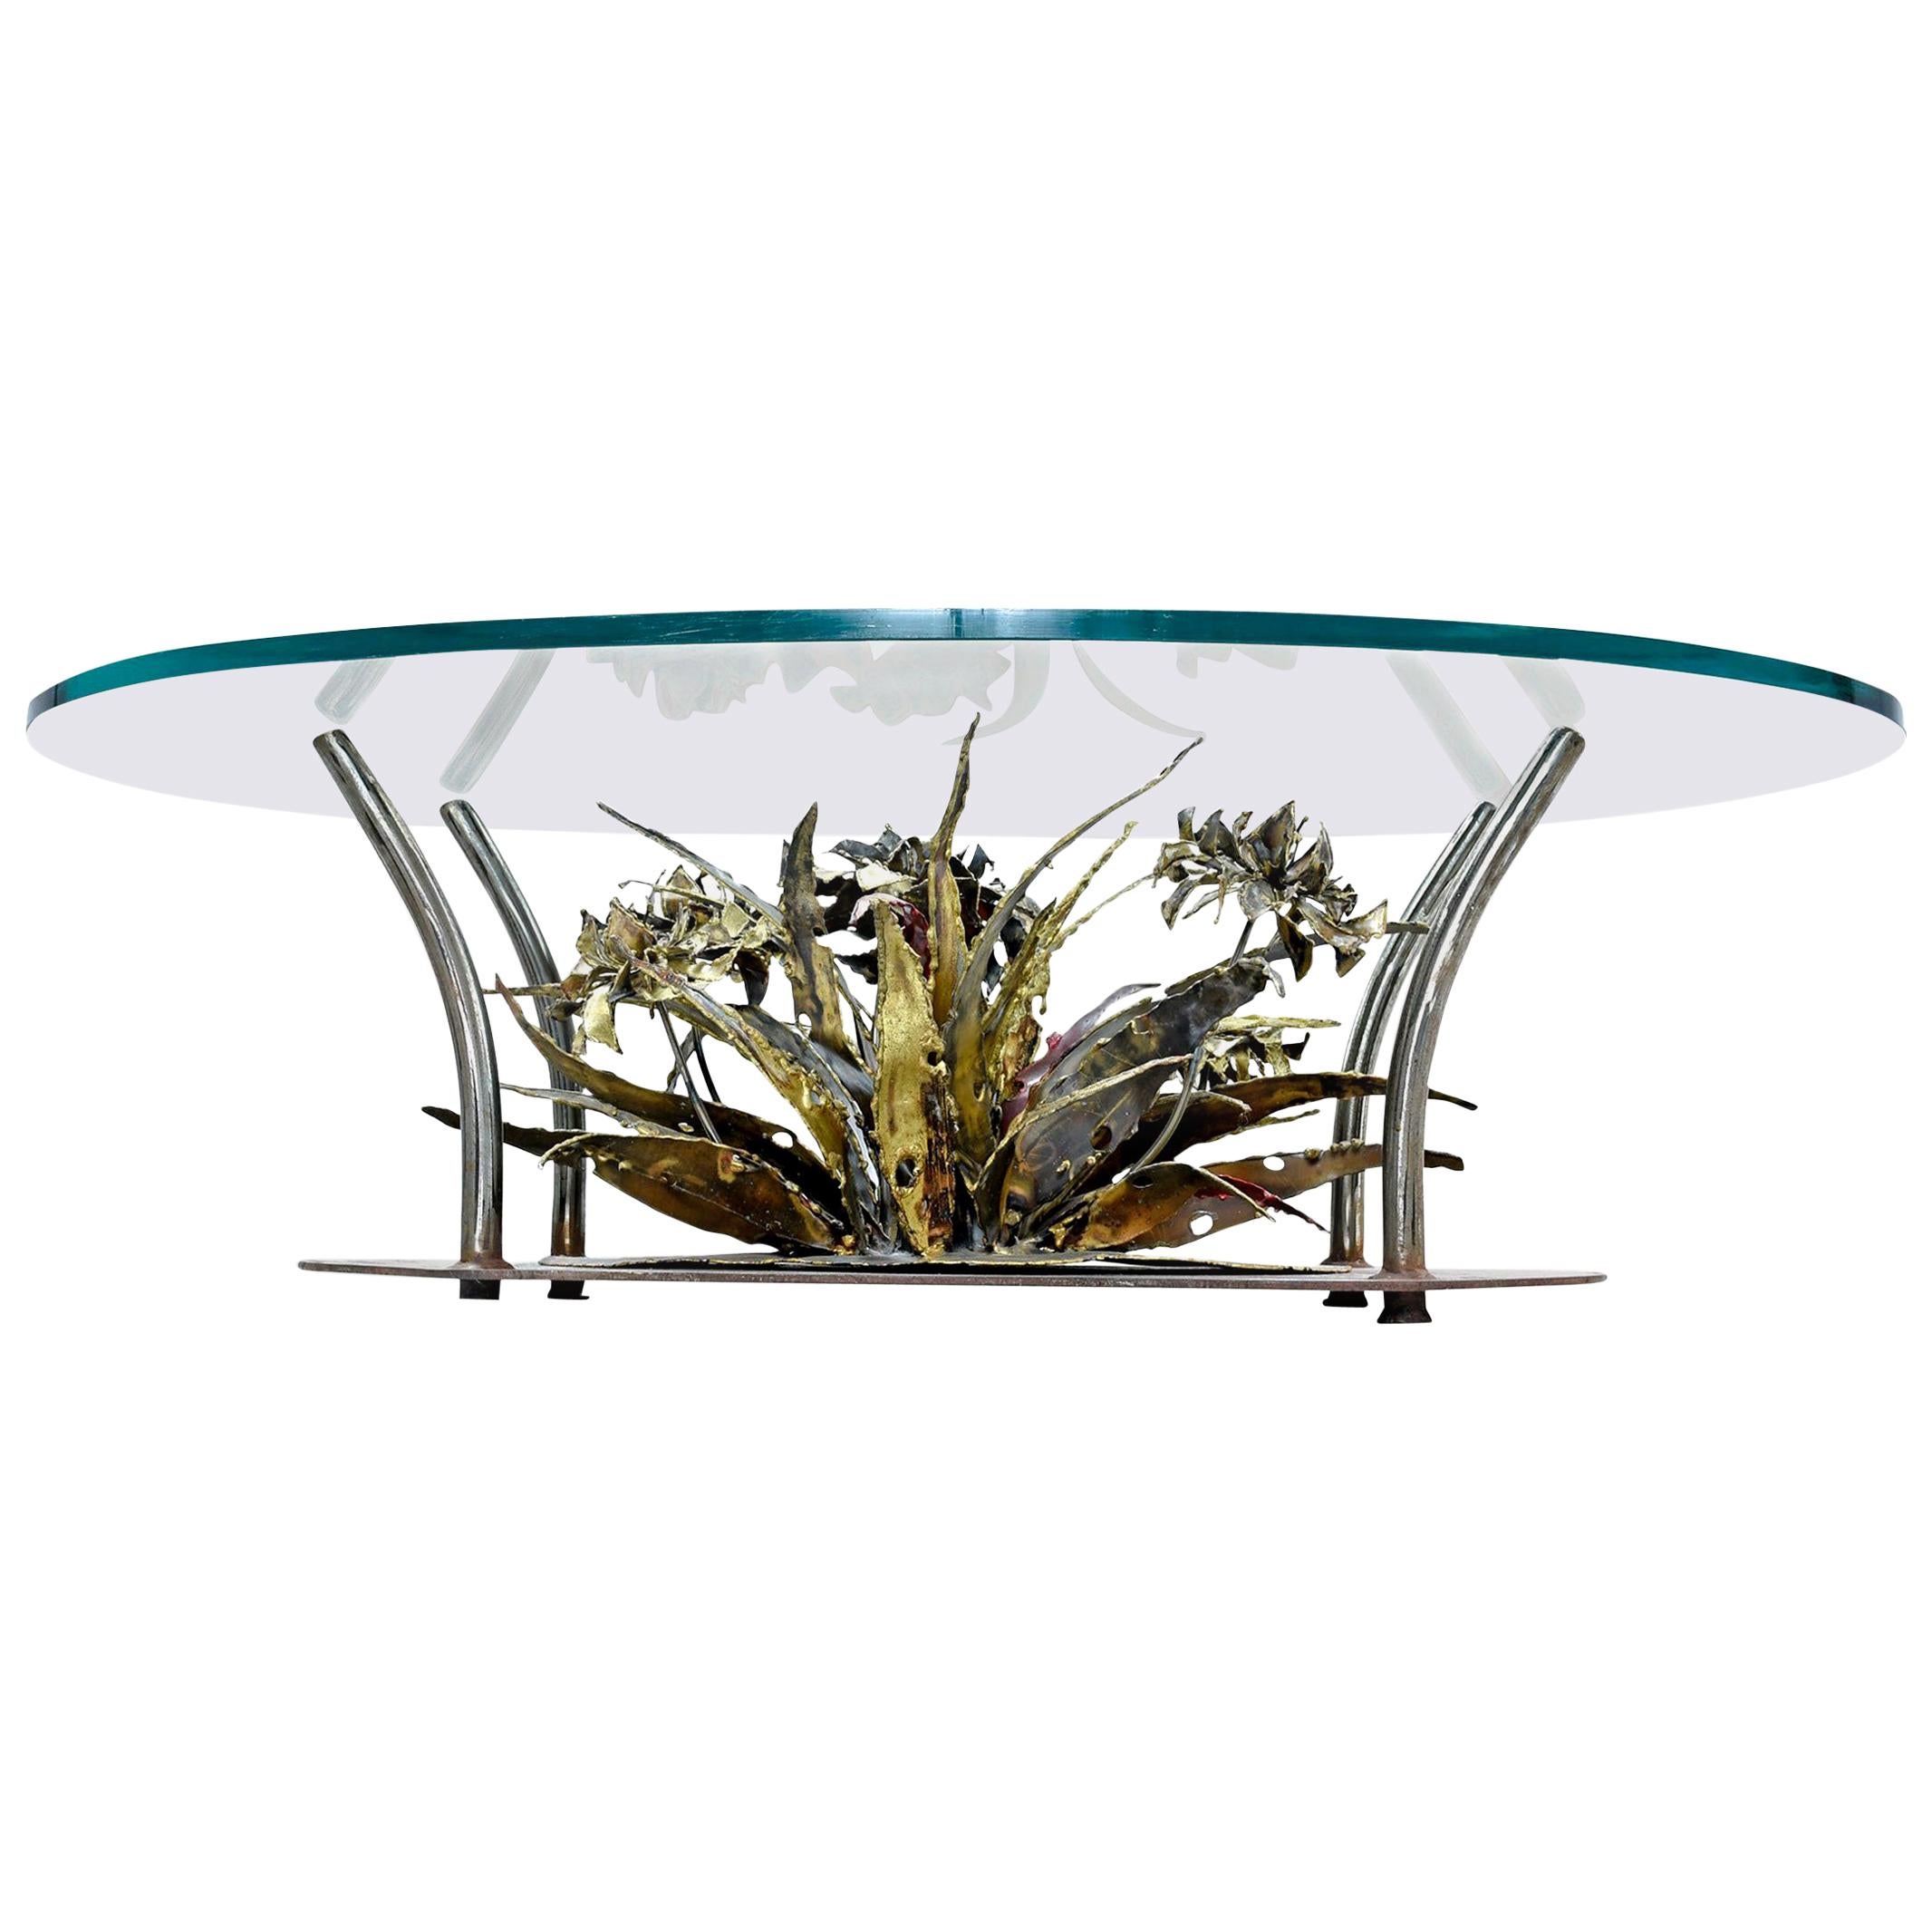 Brutalist Mid-Century Modern coffee table by Silas Seandel. The undulating oval shaped base features a large, organic floral sculpture made of patinated metal with copper, steel, gold and brass tones. The base is topped with a thick oval shape glass